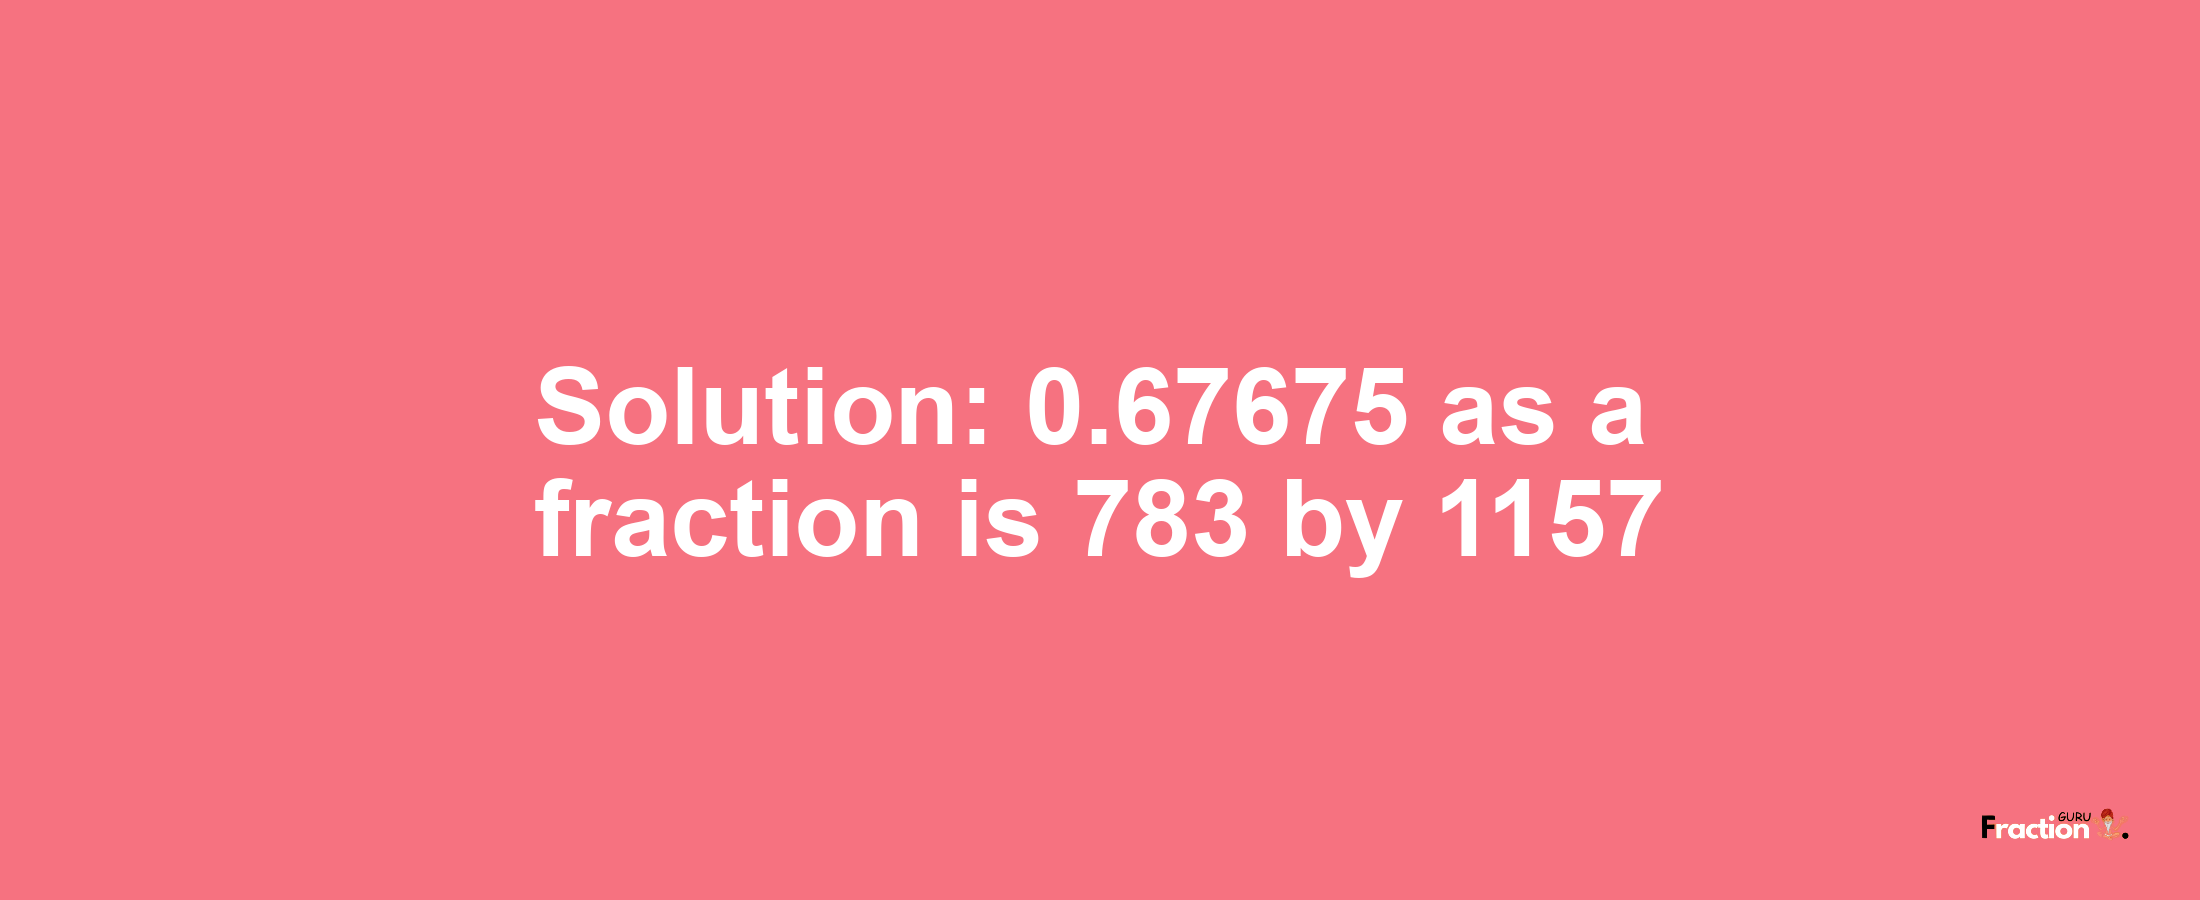 Solution:0.67675 as a fraction is 783/1157